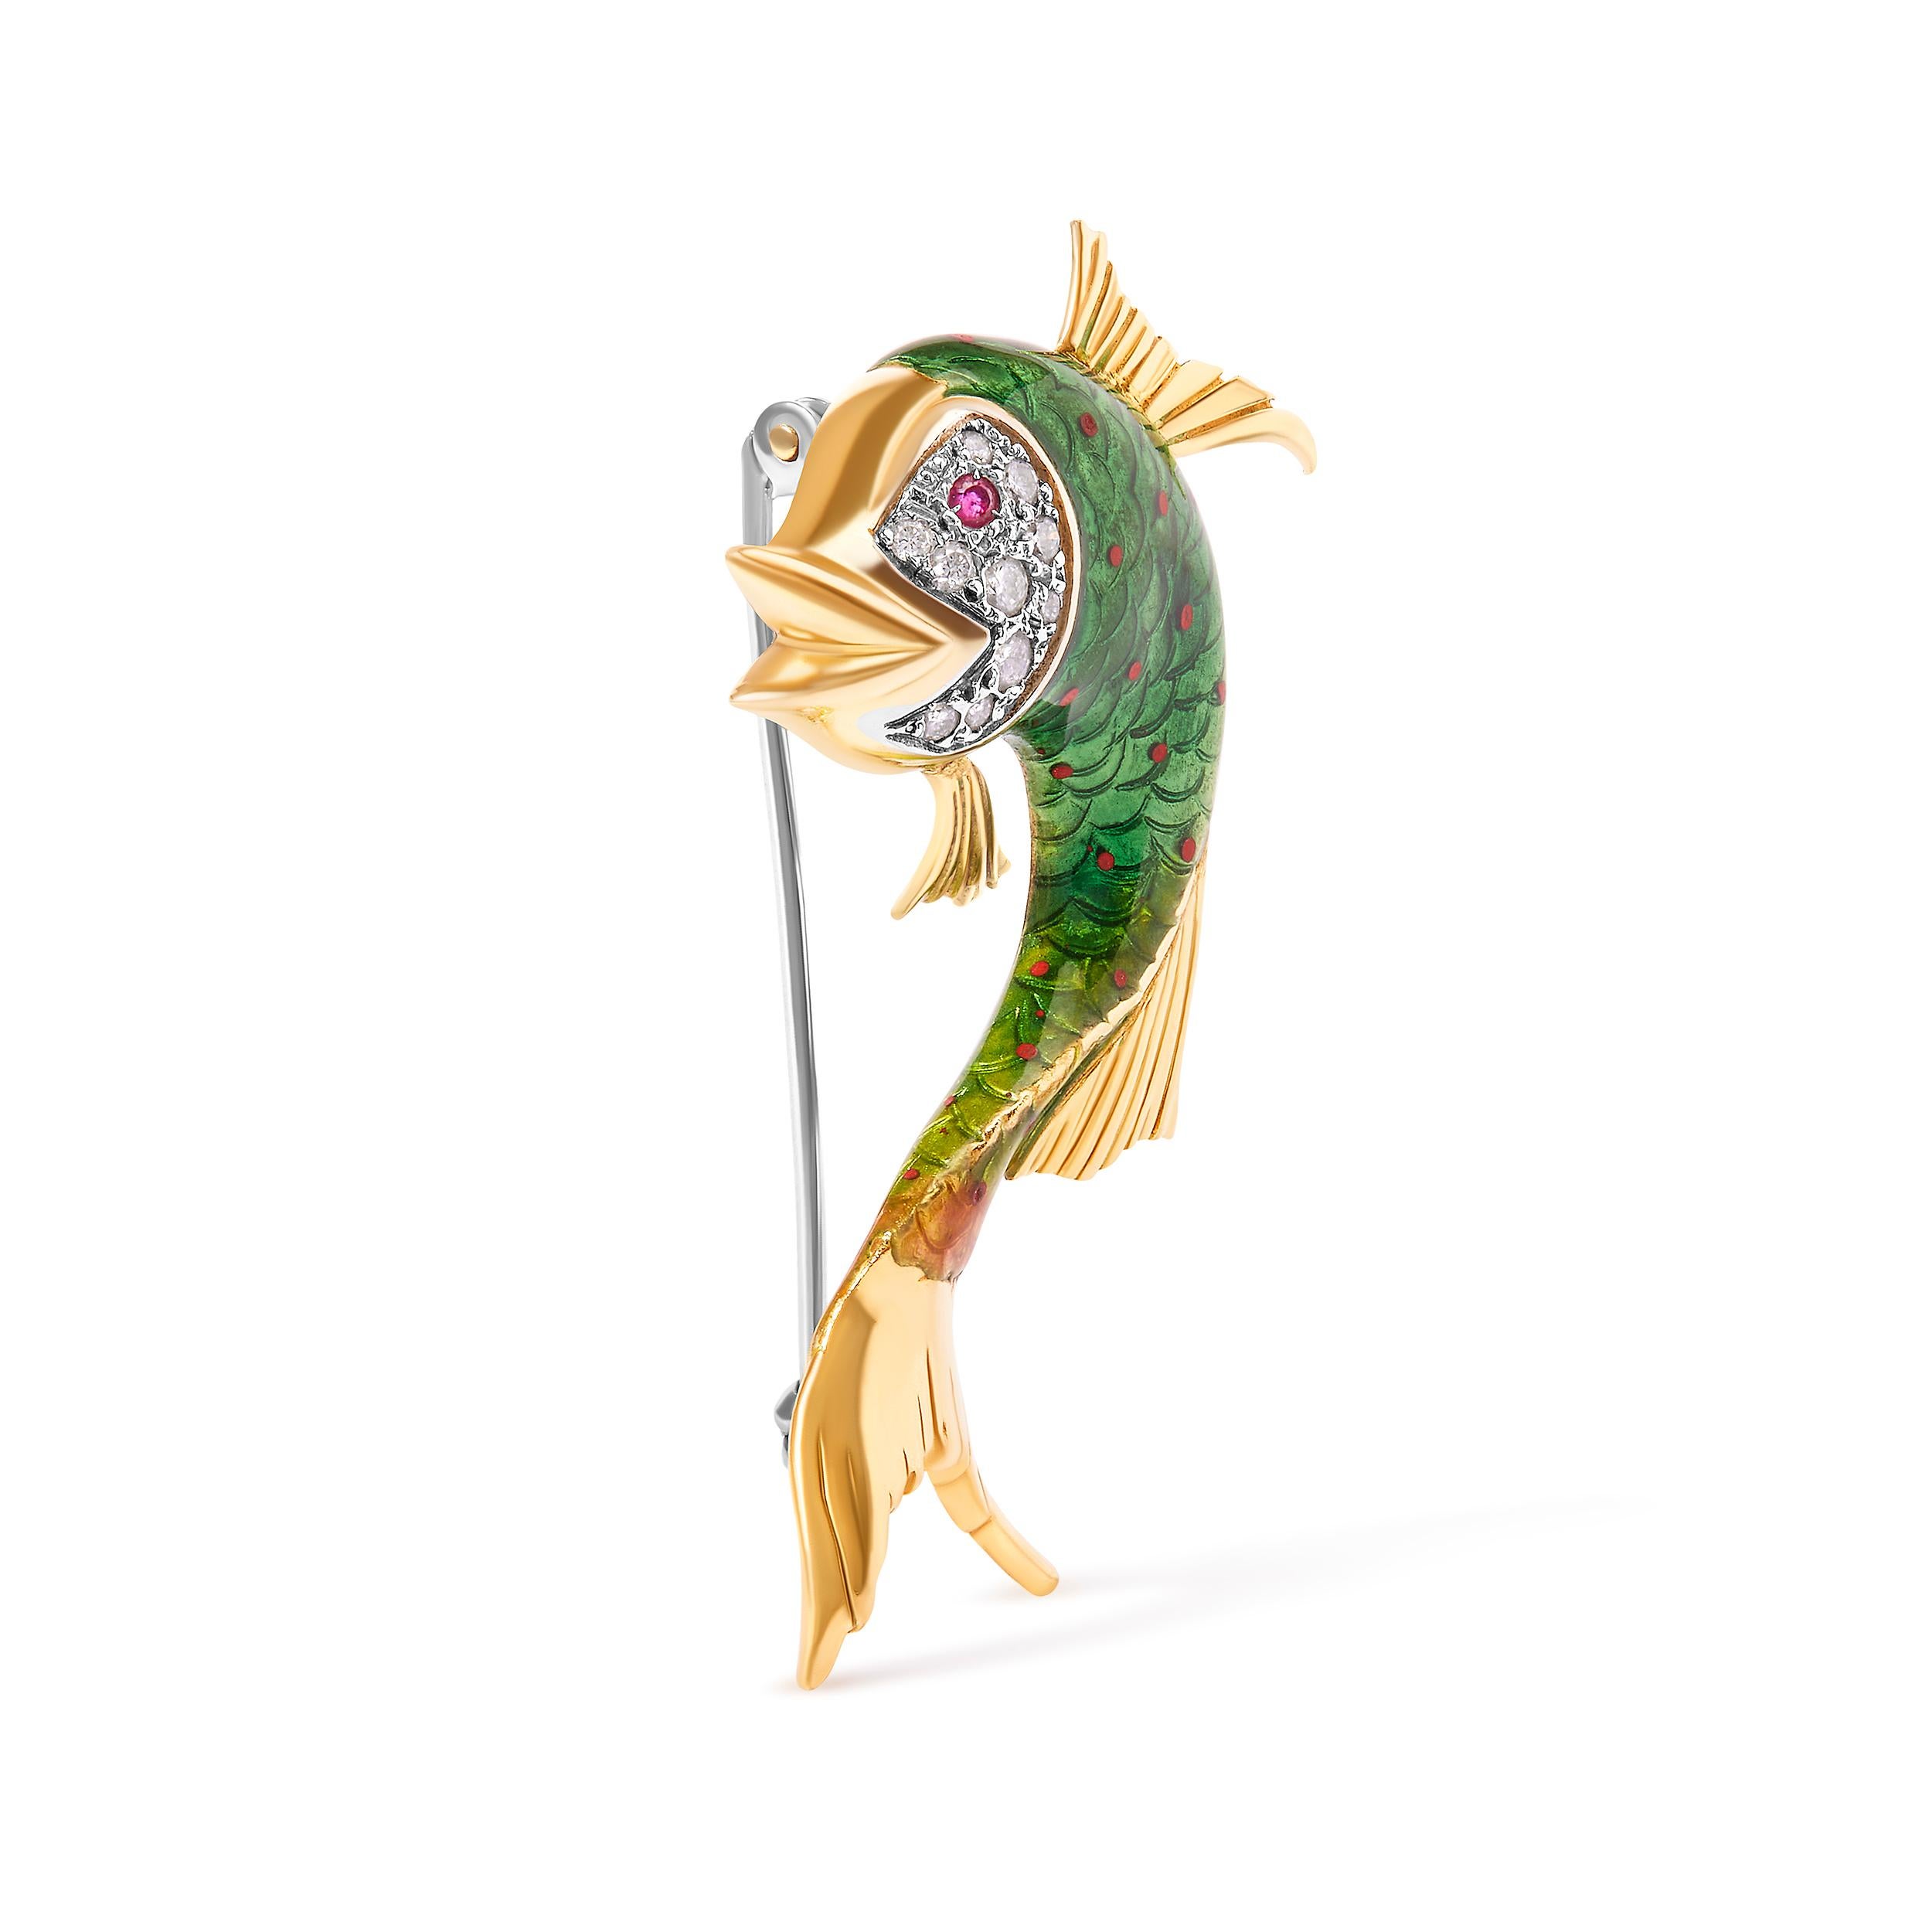 Introducing a mesmerizing masterpiece that will captivate all eyes! Crafted with utmost precision, this 18K Yellow Gold and Green Enamel Fish Brooch Pin showcases exquisite artistry and impeccable attention to detail. Adorned with 10 dazzling round